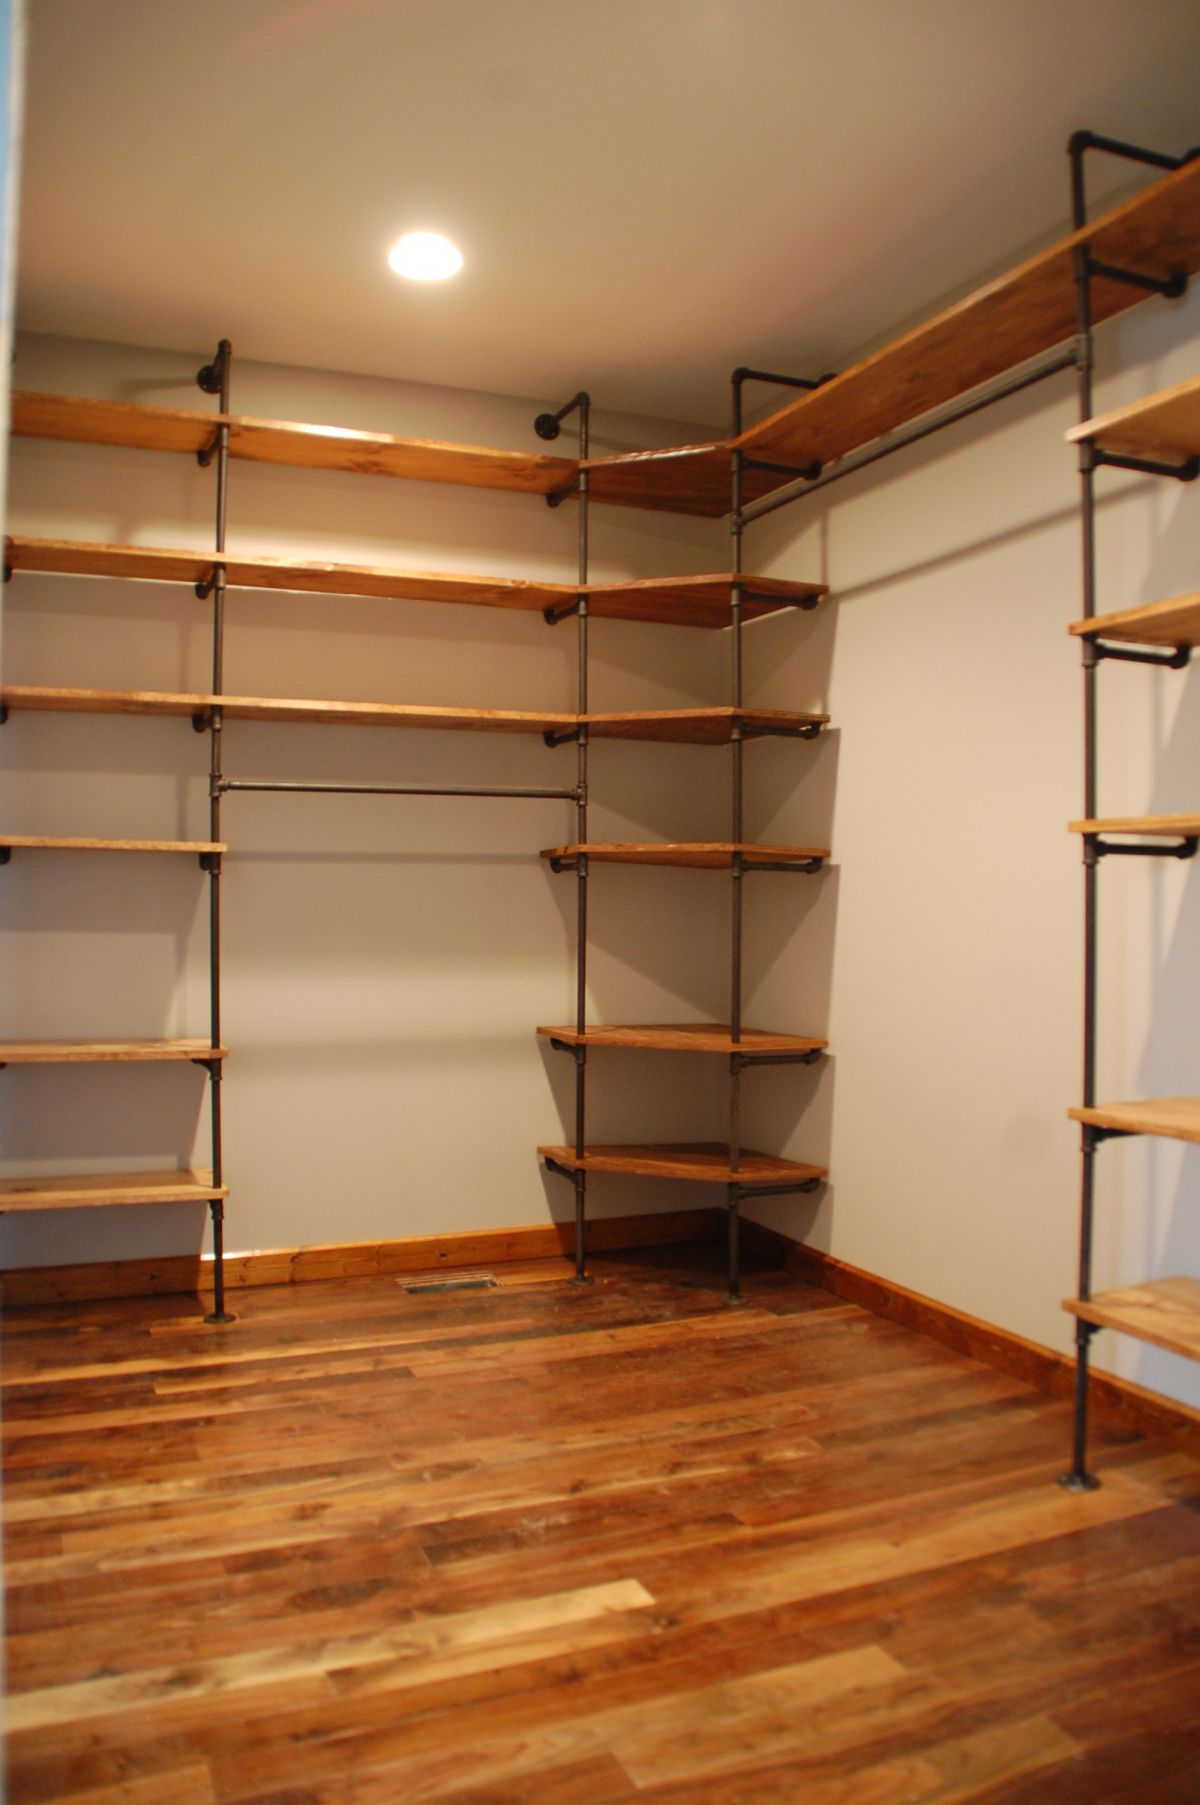 Pipes and wood closet shelves